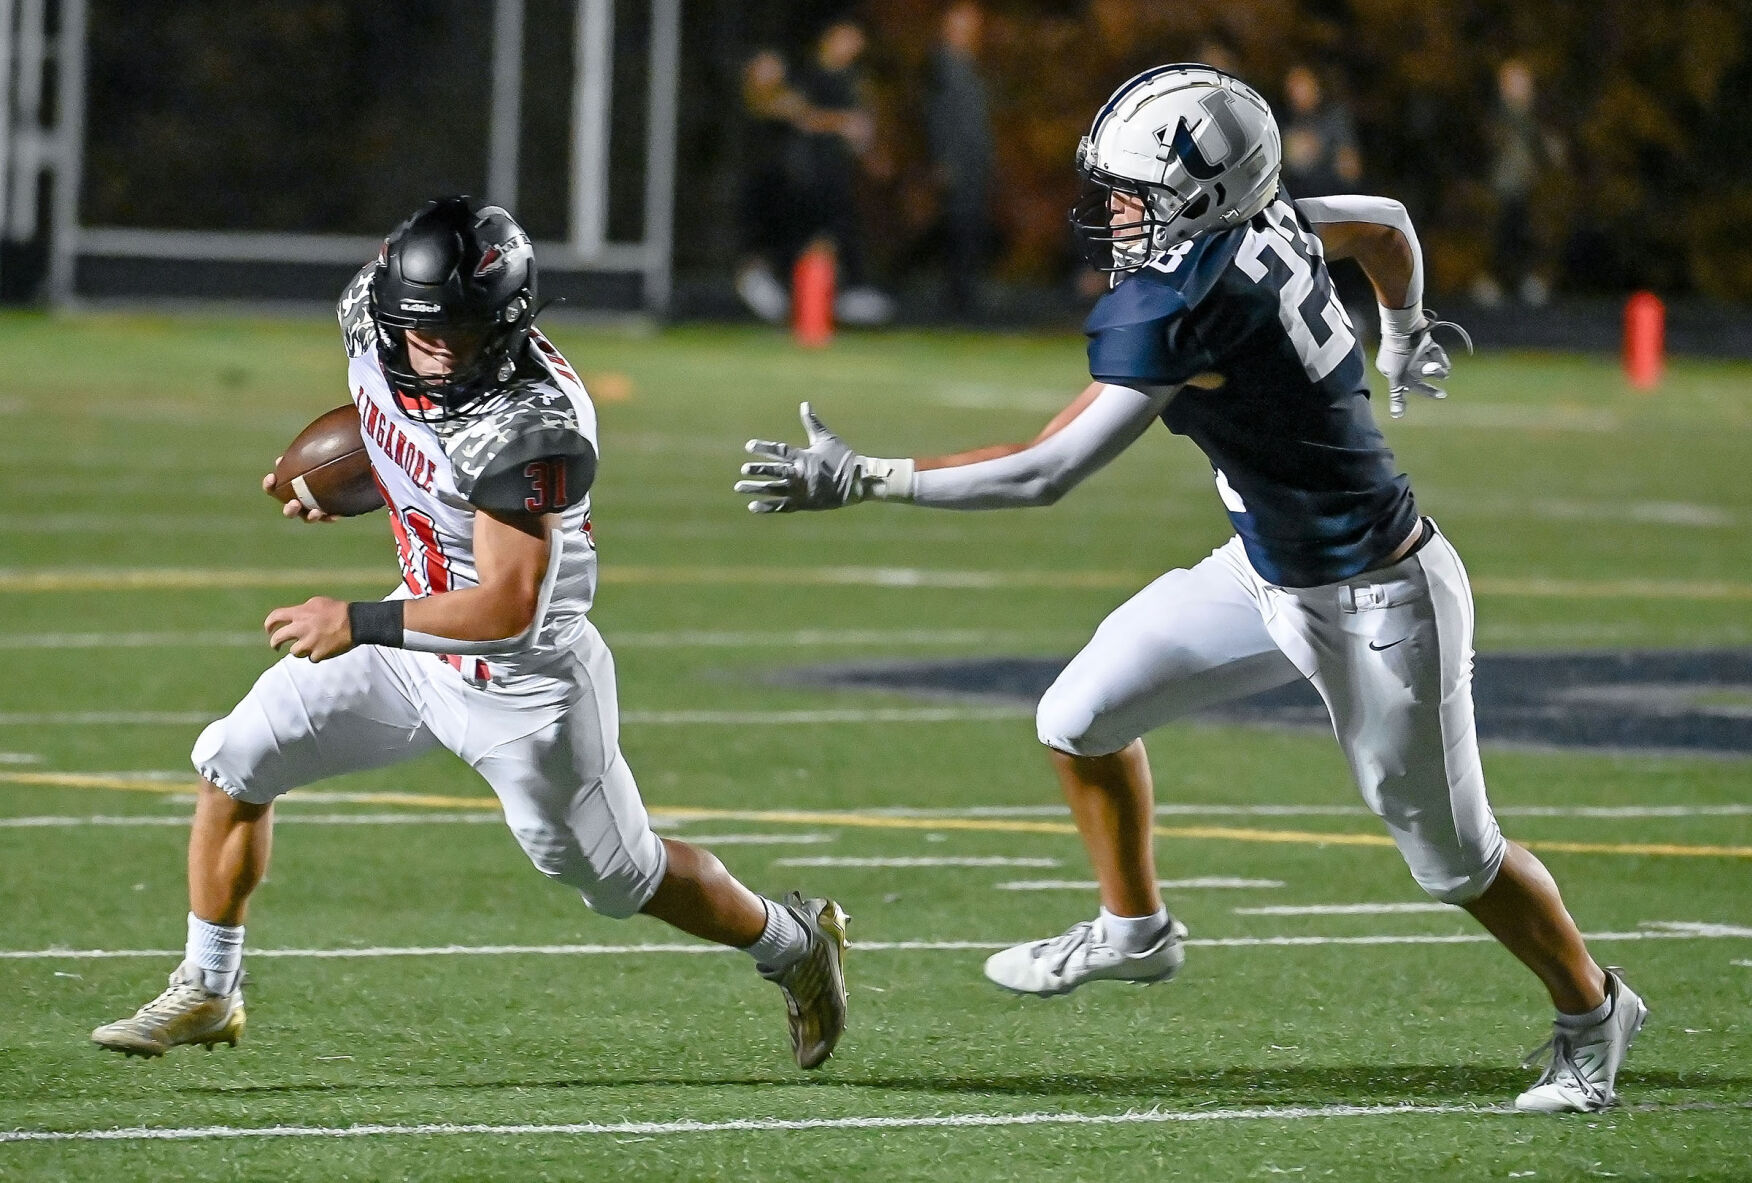 Linganore Football’s Dominant Defense Secures 49-20 Win over Urbana